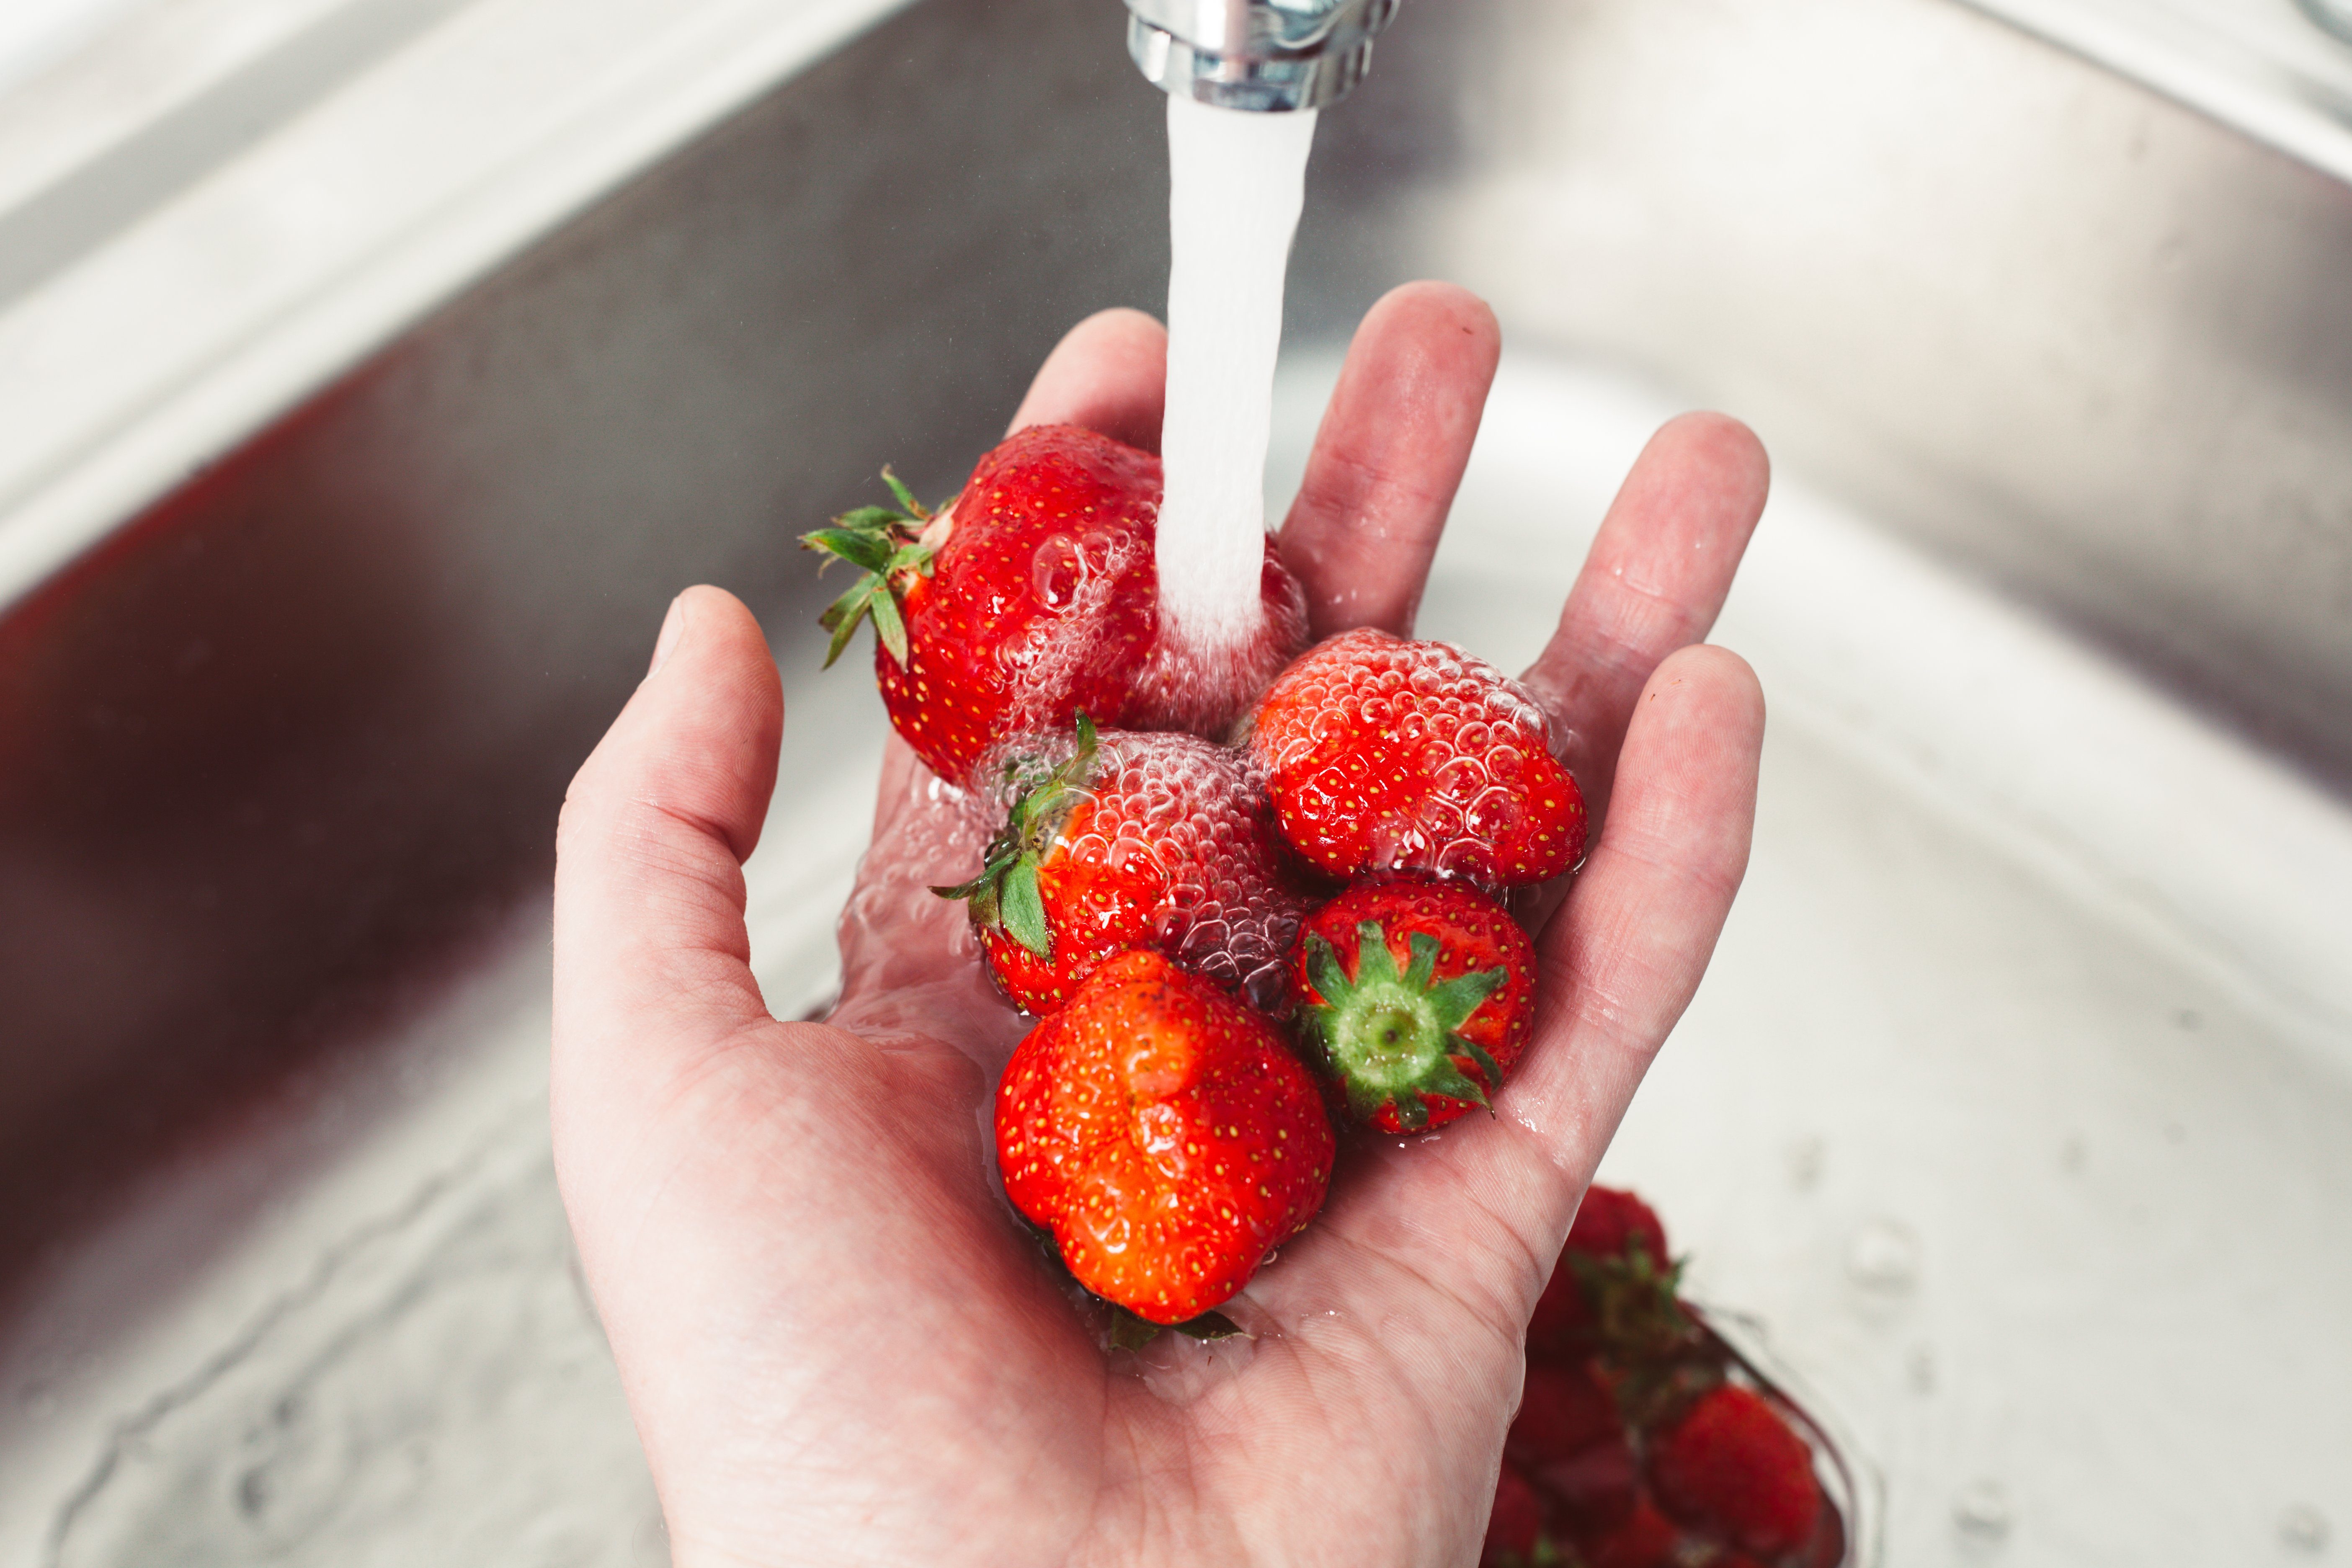 Strawberries in hands under the water. Pure fruit is health